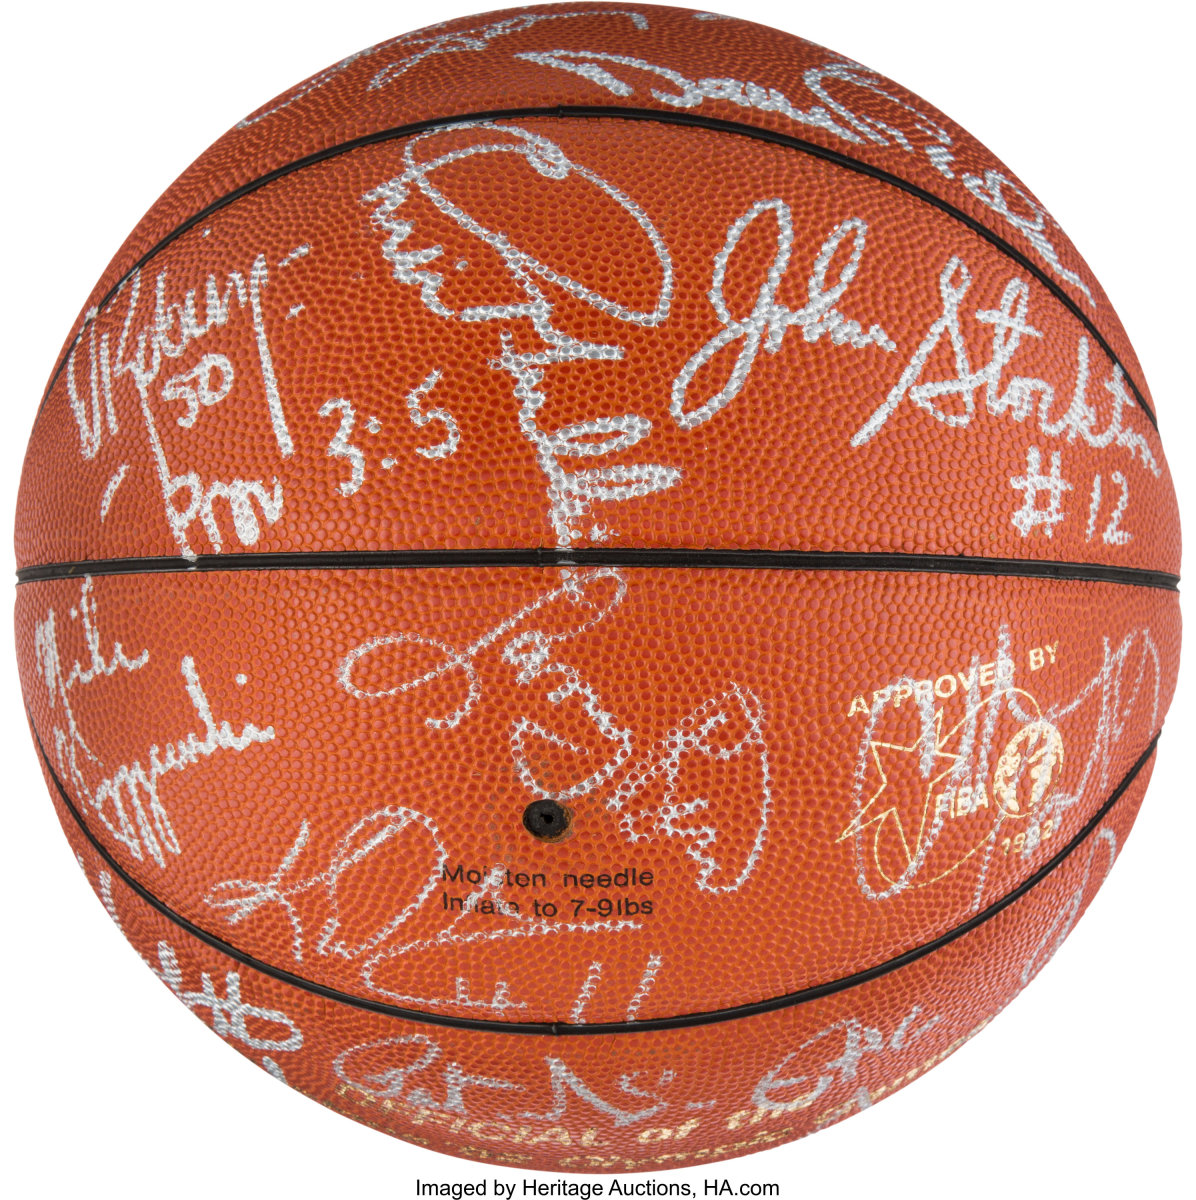 A presentation basketball signed by the Dream Team featuring painted panels that highlight details like the score and date of the gold medal game.